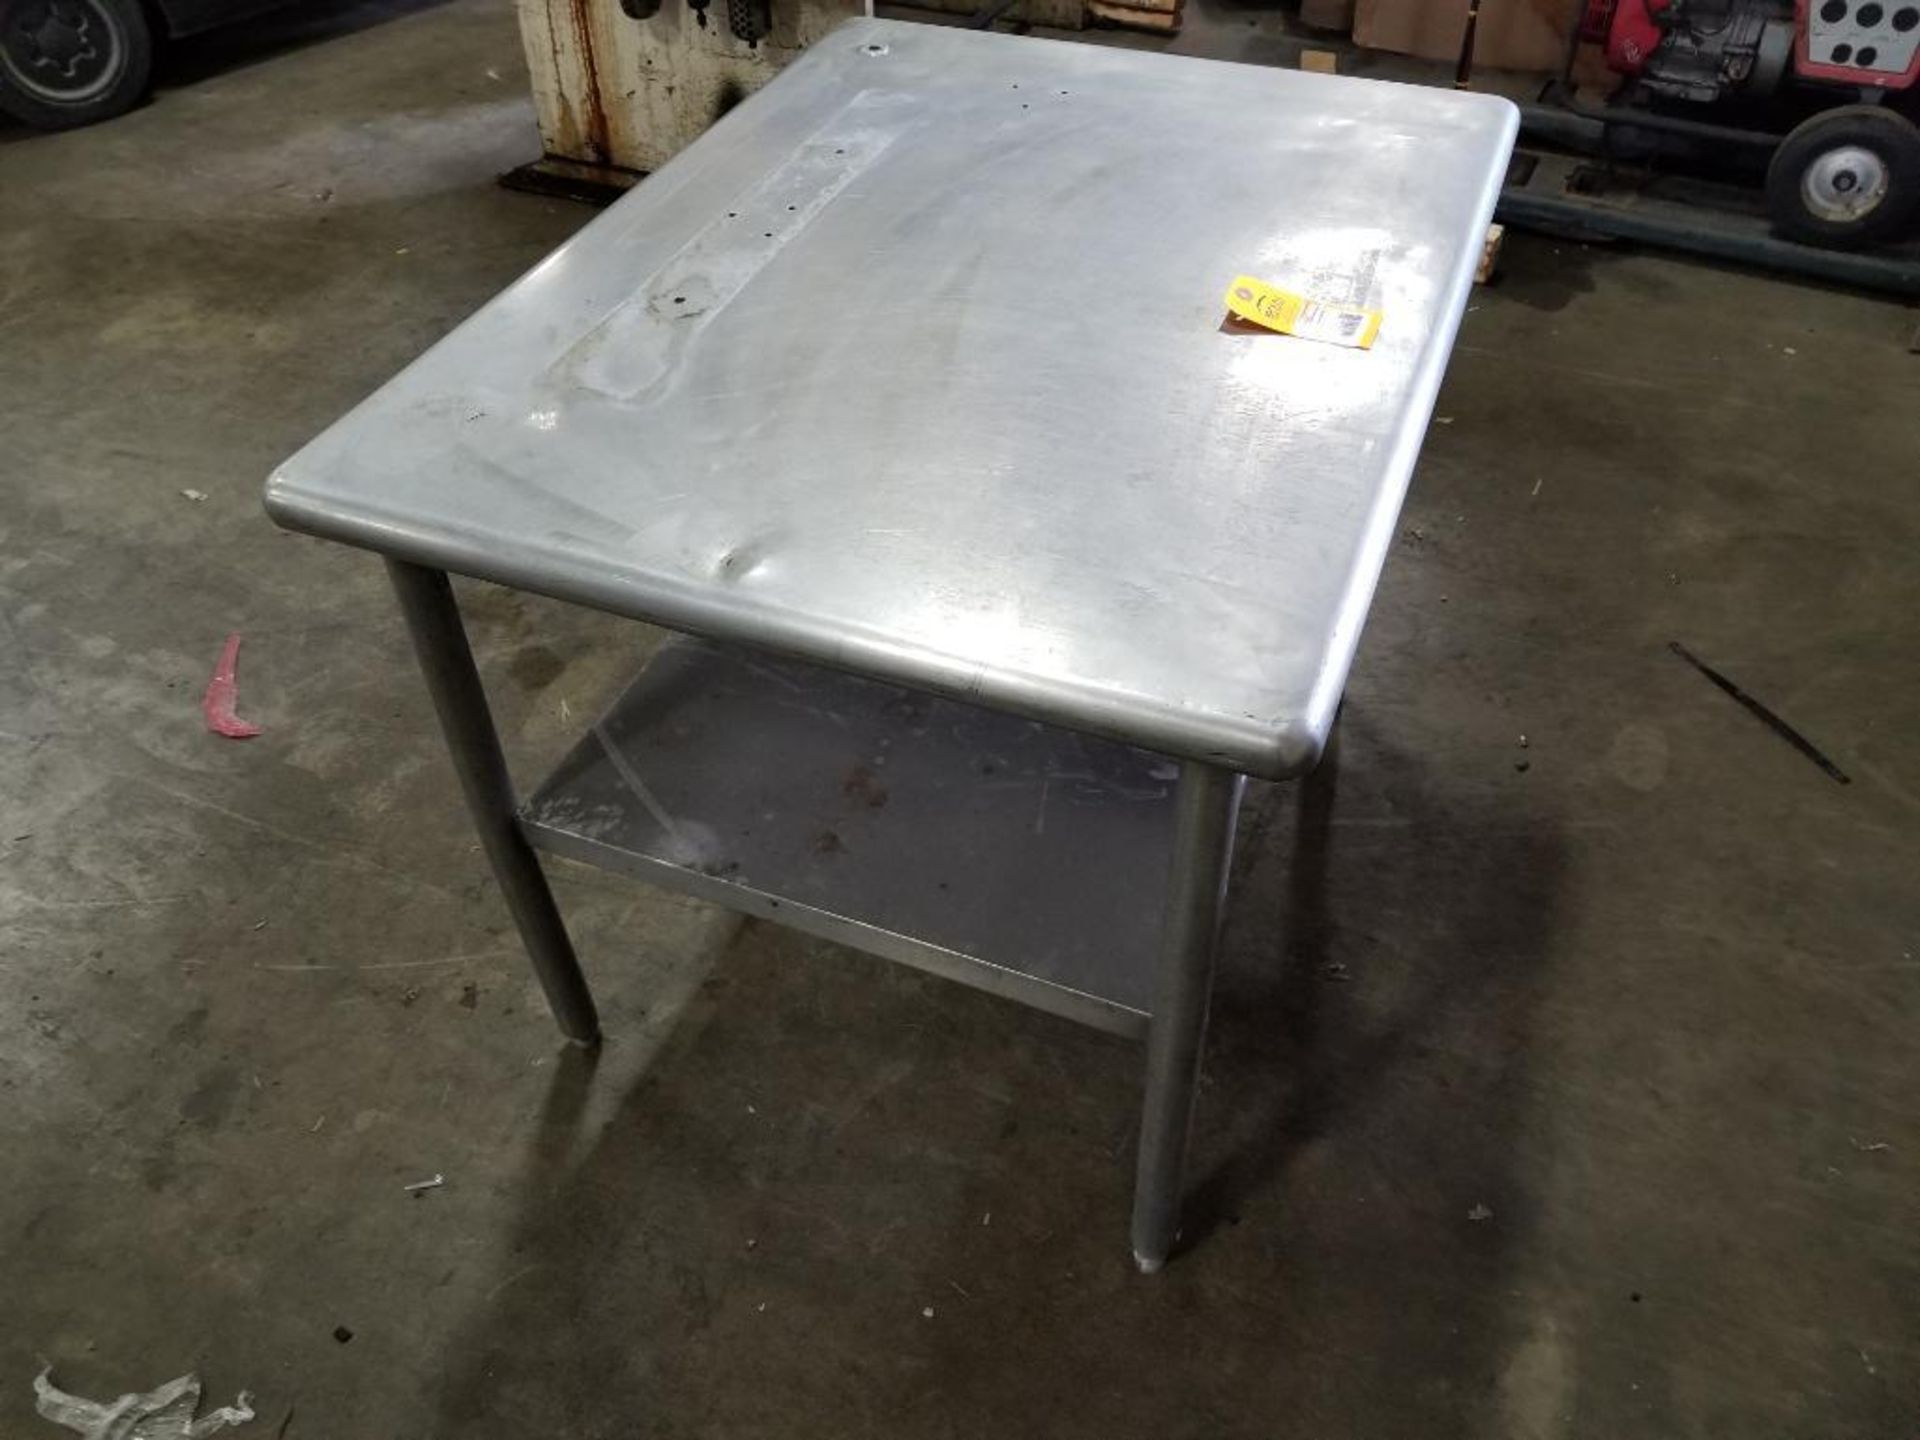 Stainless steel prep table. 40" wide x 30" deep x 30" tall. - Image 2 of 3